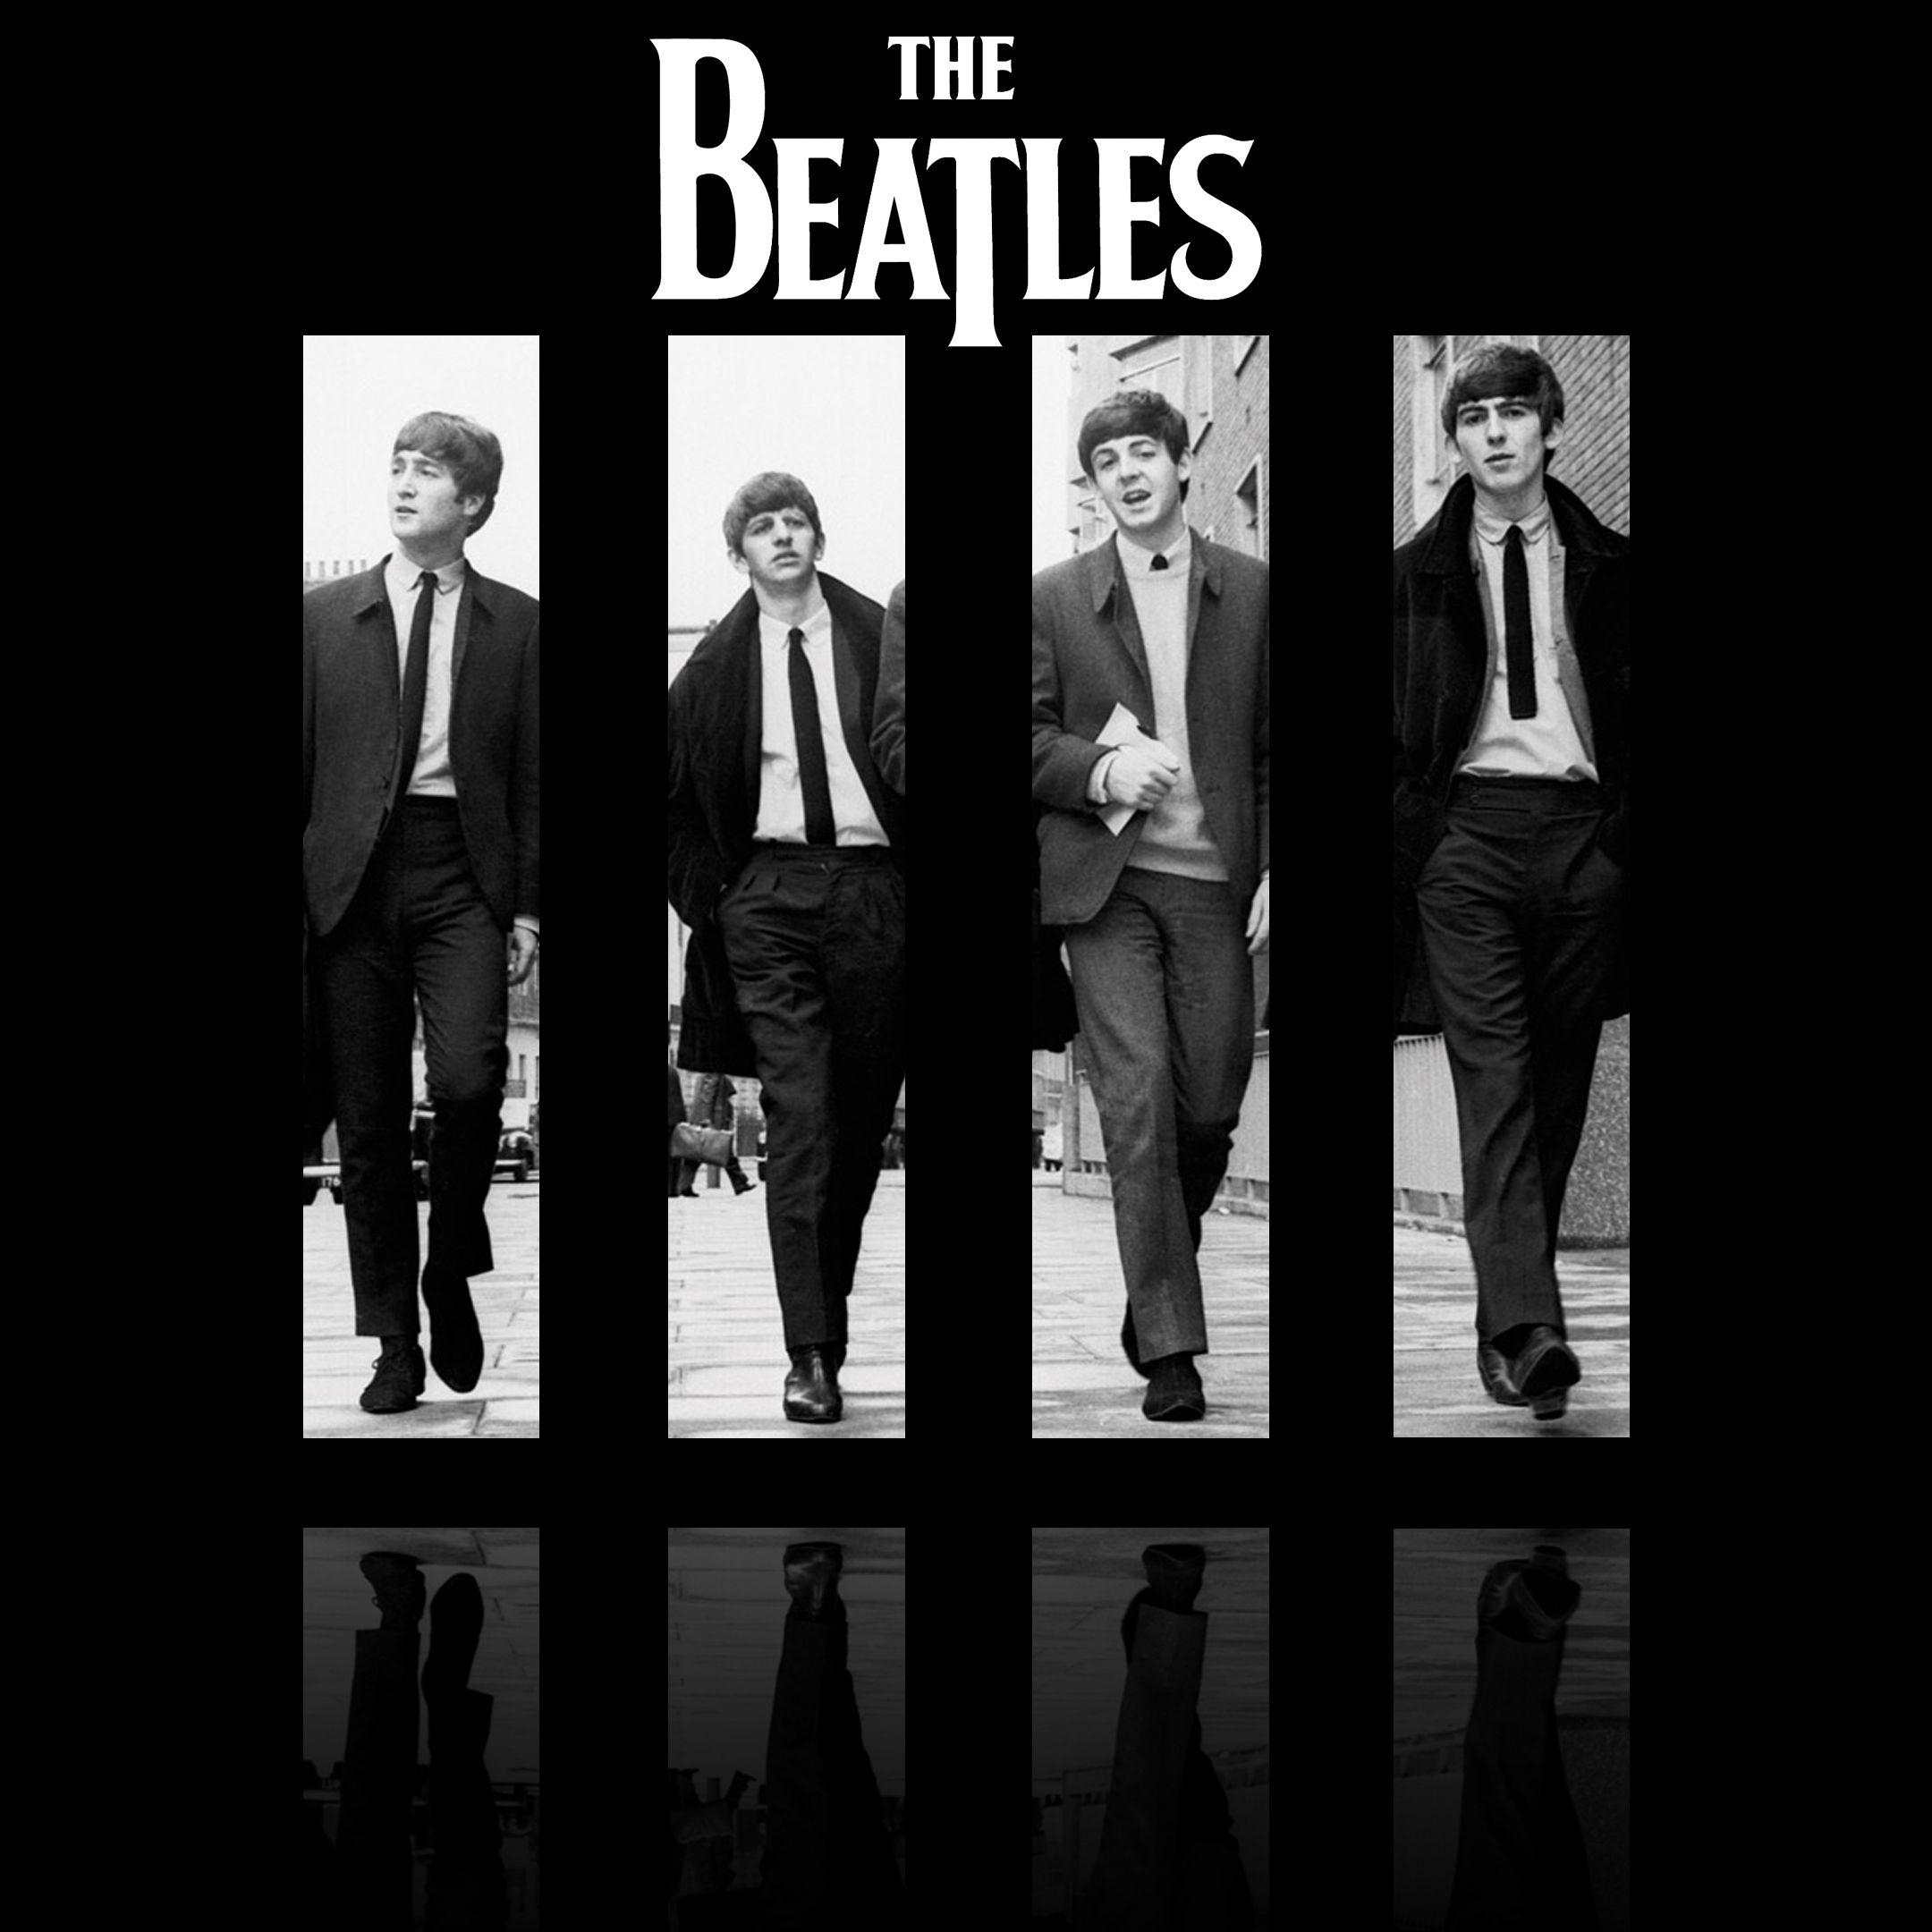 Beatles HD Wallpaper For Android